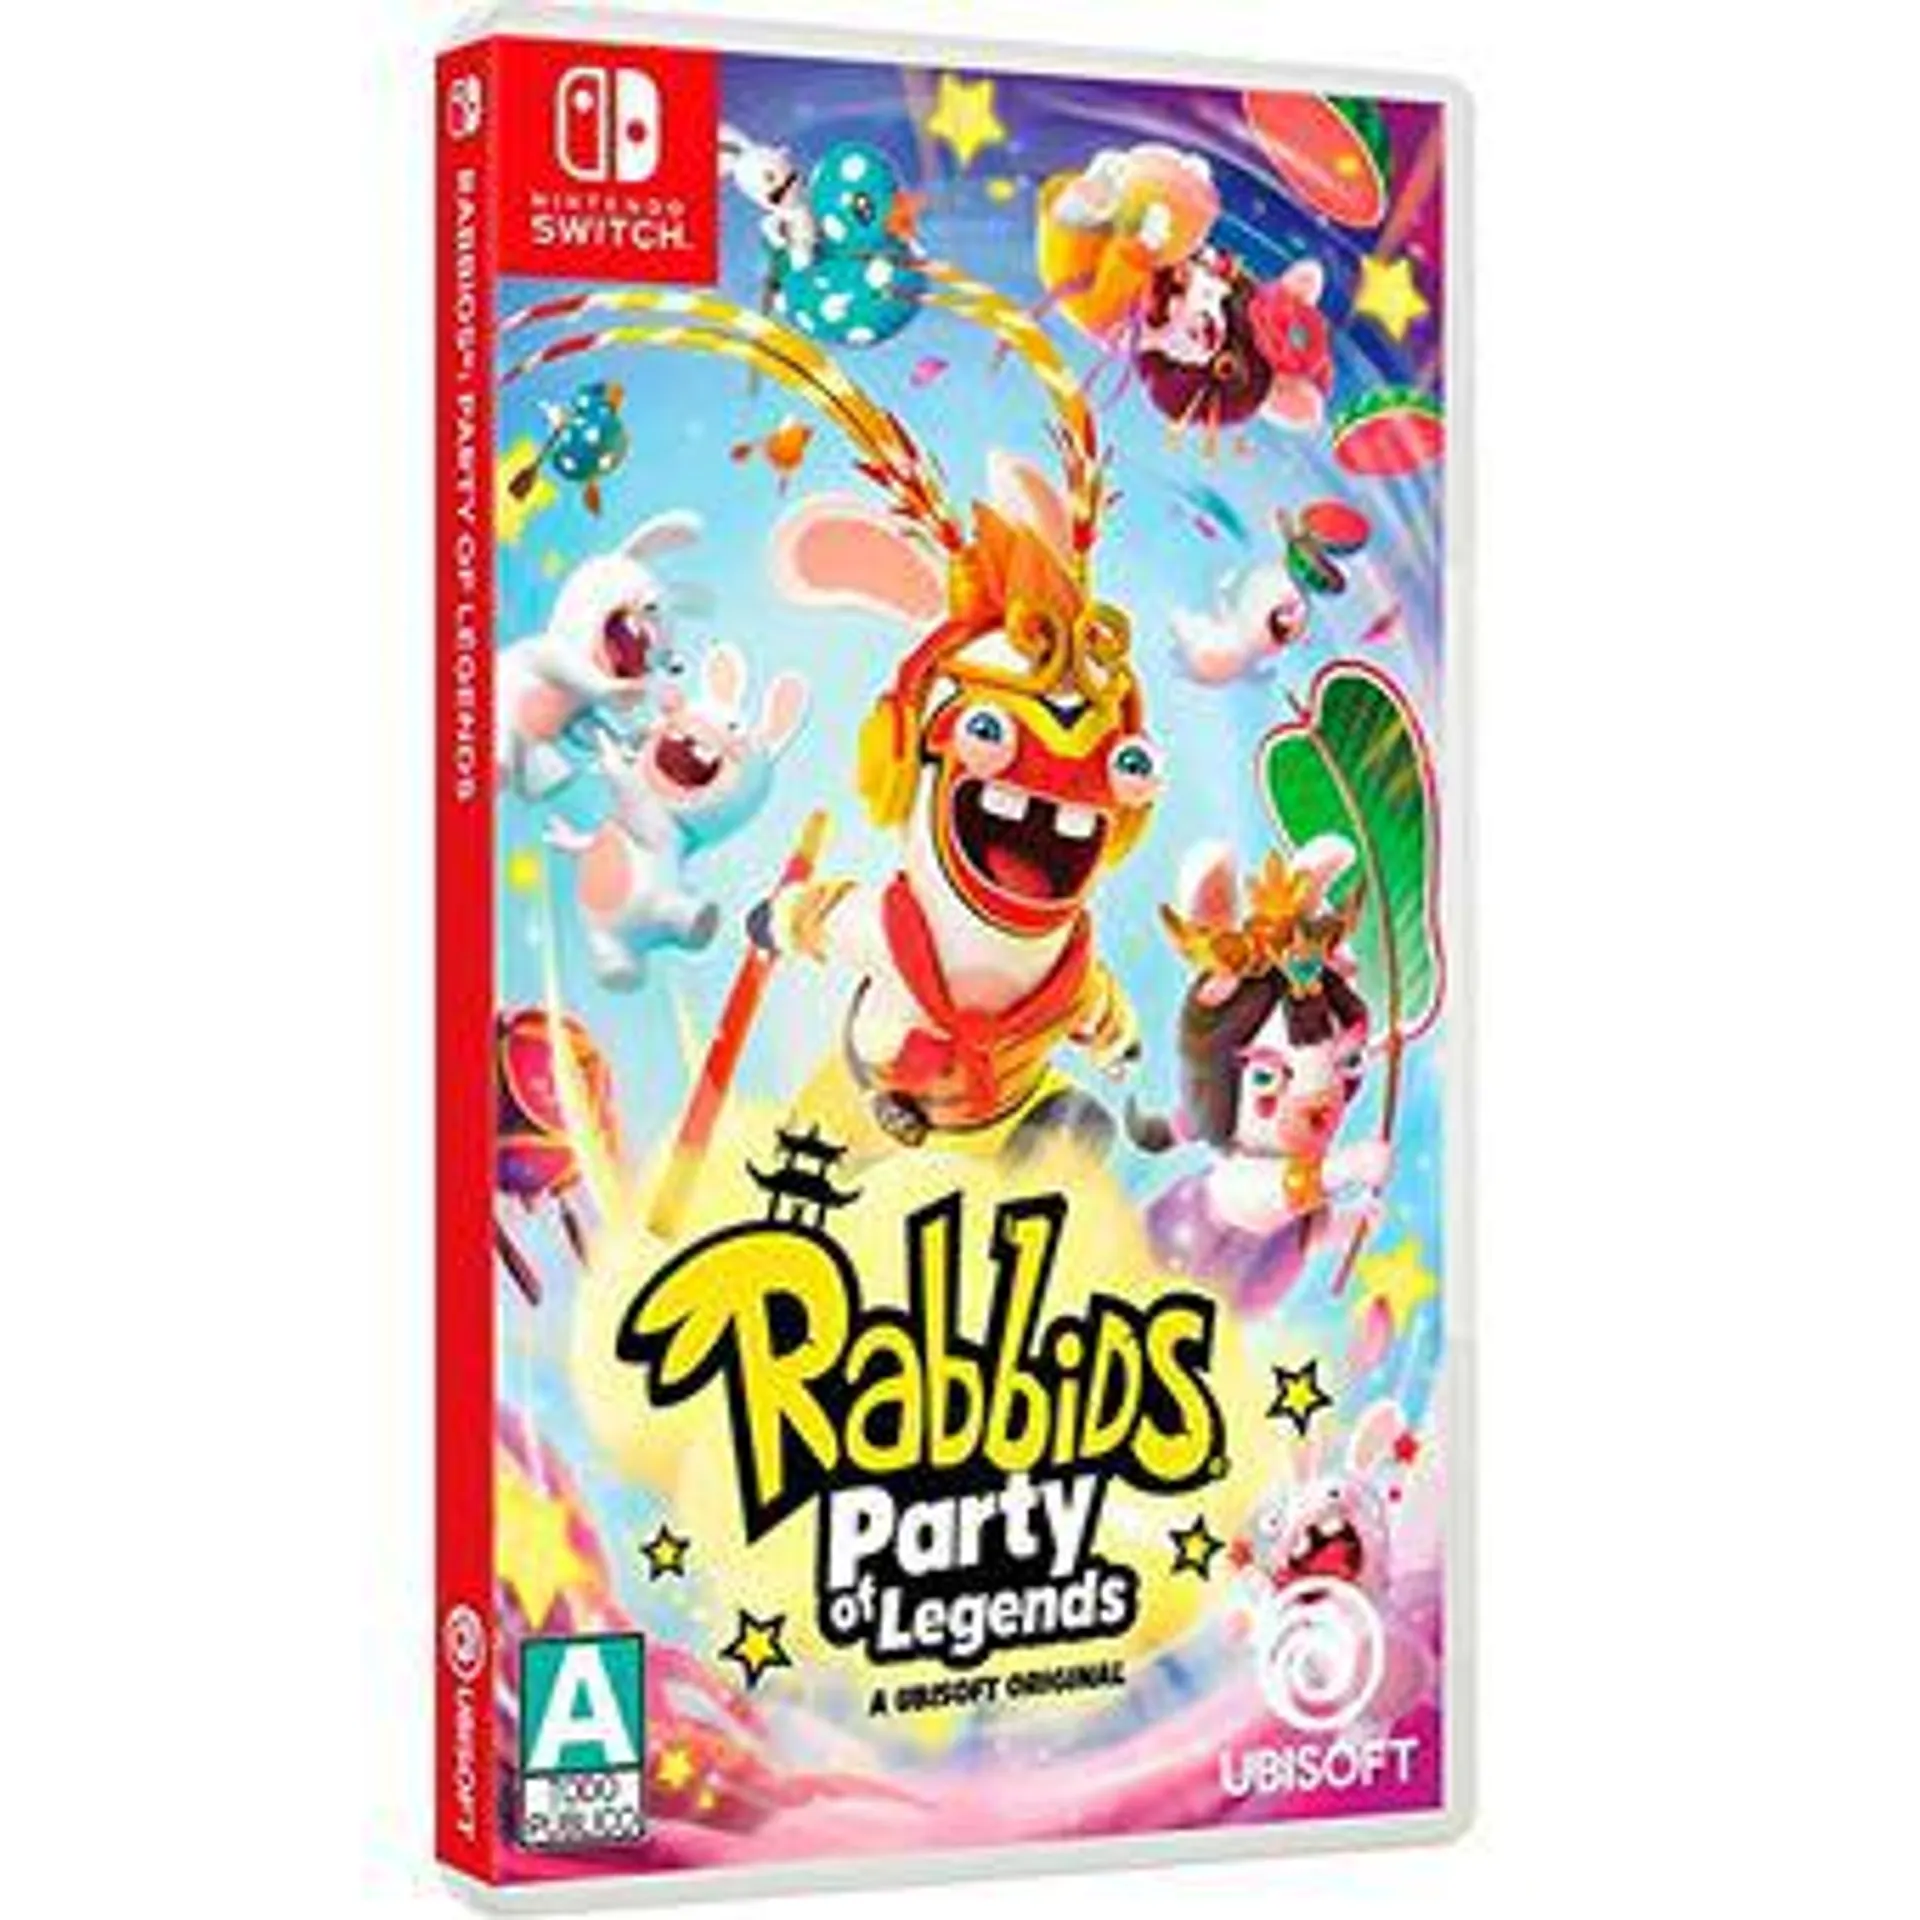 Rabbids Party Of Legends - Standard Edition - Nsw